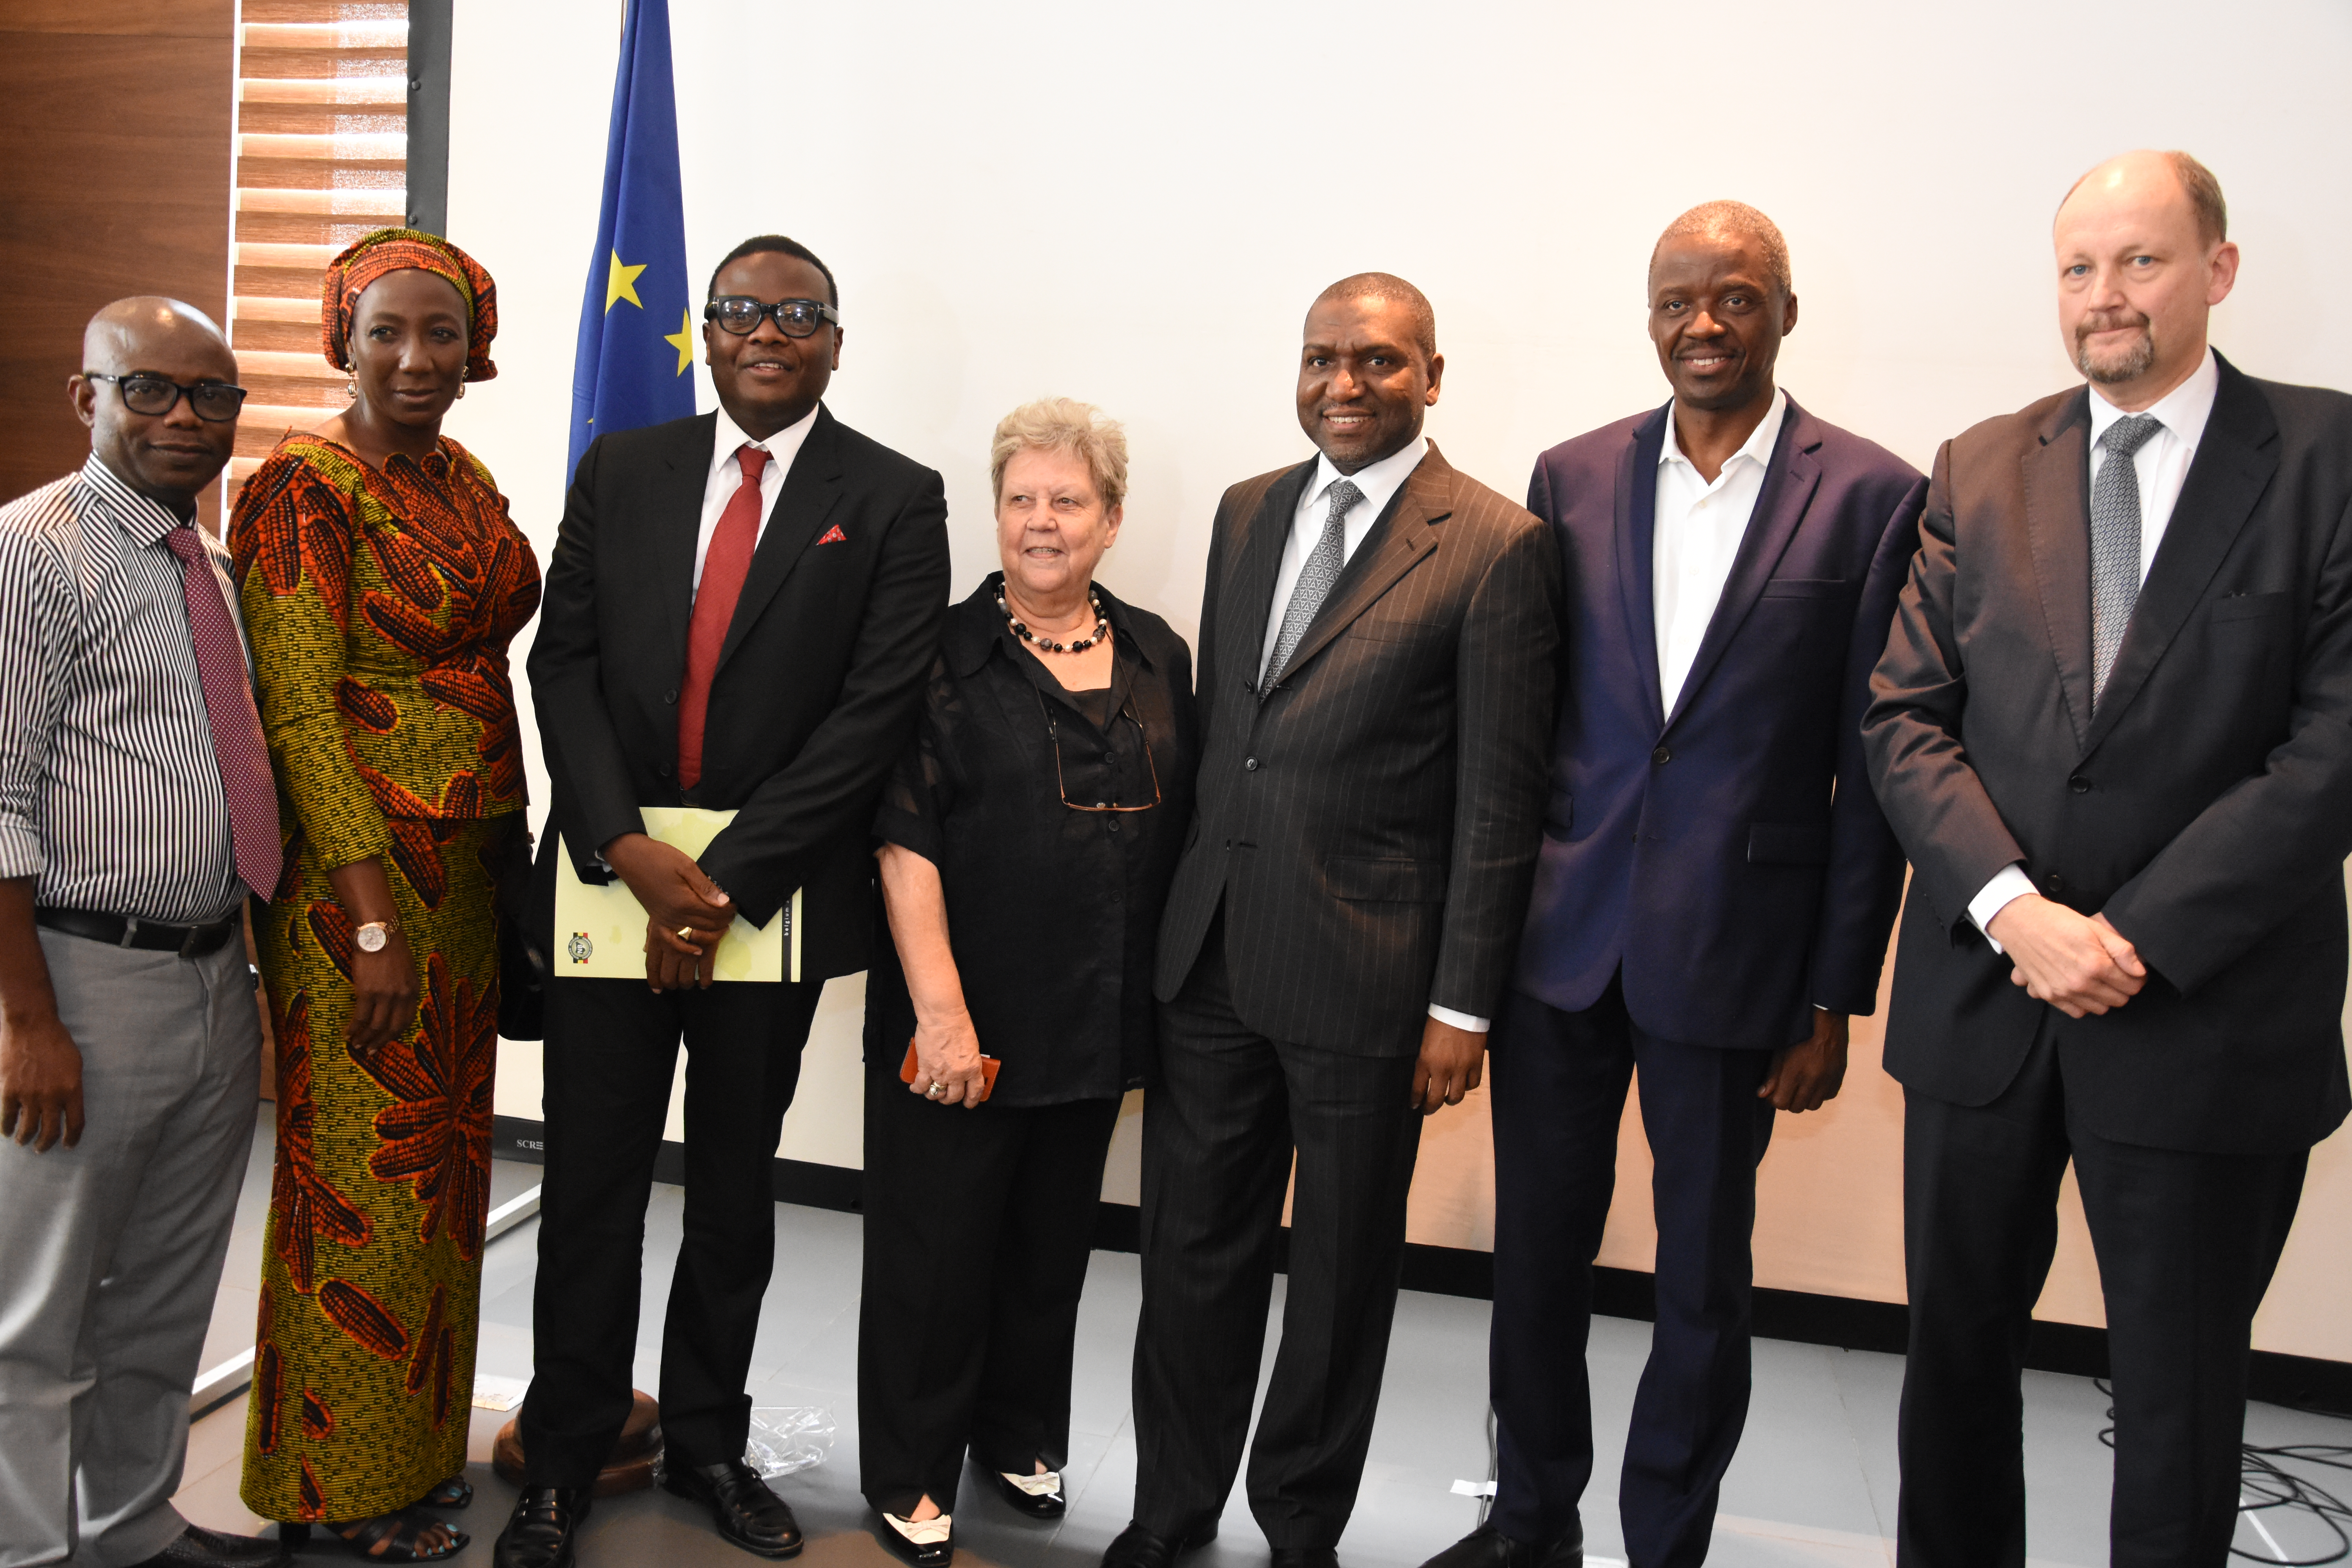 L-R: Babatunde Faleke – Regional Coordinator S/W, NEPC; Ms. Lolo Kadafa – Assistant General Manager, Group Head,  Agro Processing, BOI; Mr. Tunde Okoya - President NBCC;  Mrs. Paulette Van Trier – Founder Nigerian-Belgian Commercial Information and Documentation Center (NBCIDC); Alhaji Sani Dangote - Vice President of Dangote Group, Chairman Dansa Holdings Limited; Dr. Jide Adedeji – CEO, Mouthfresh; His Excellency, Michel Arrion - Ambassador/Head of Delegation of the EU to Nigeria and ECOWAS.